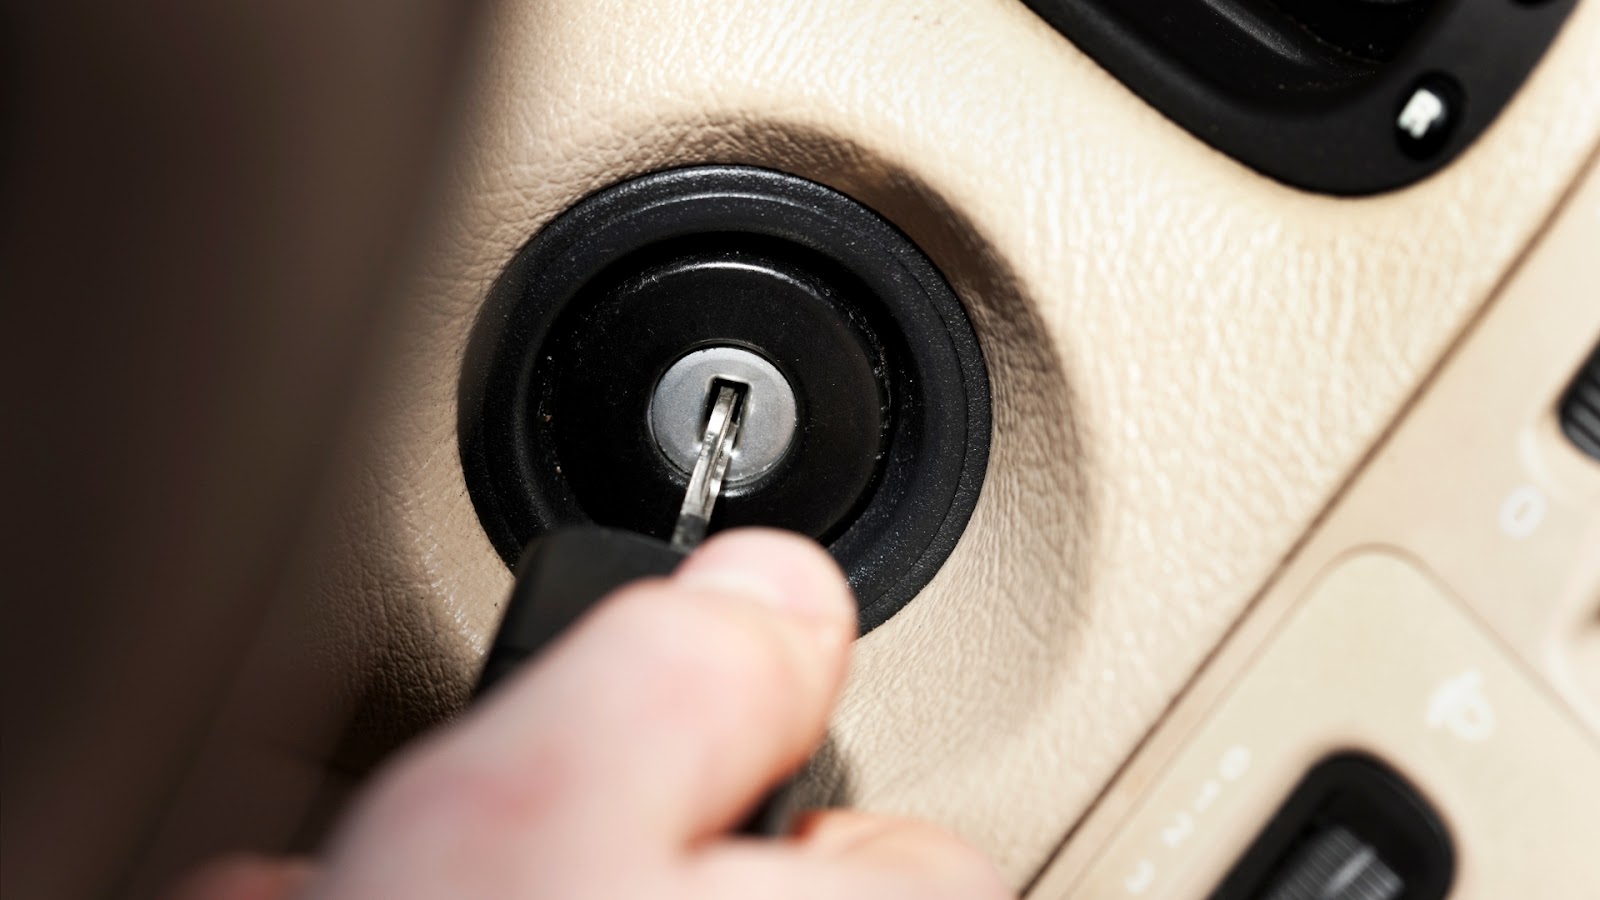 A user inserting a key into the ignition switch